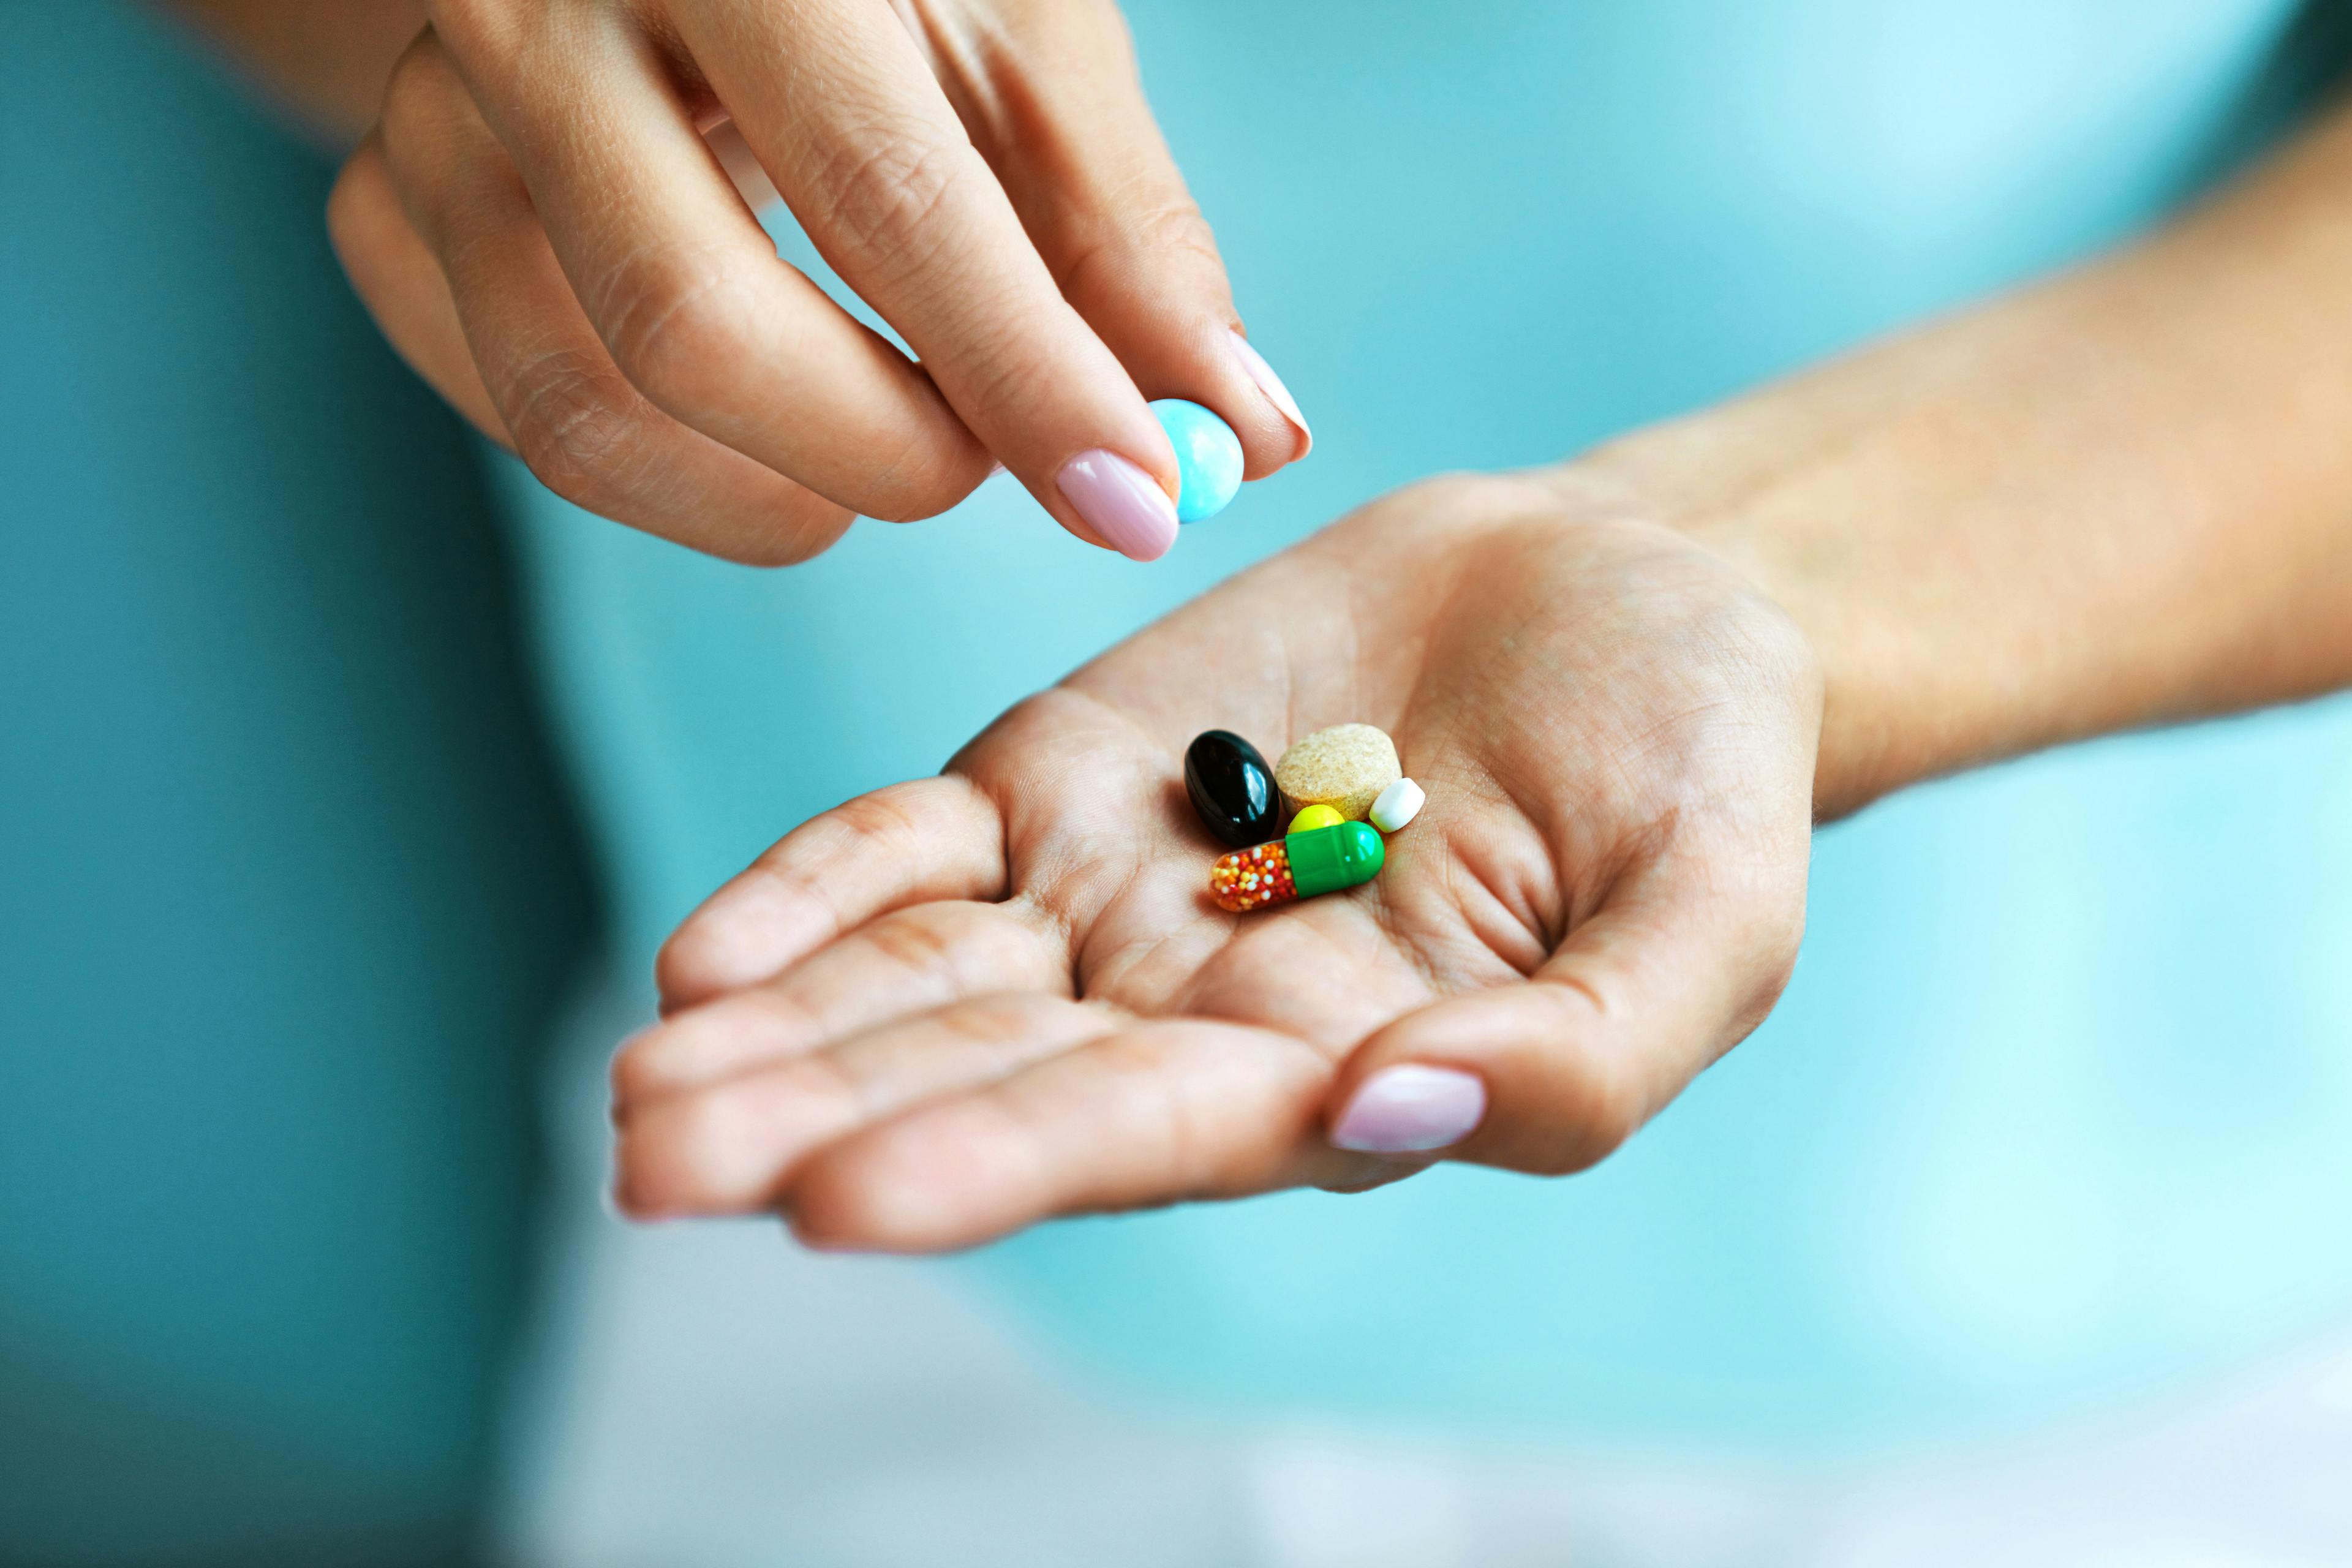 Advise Patients On Five Tips When Consuming Vitamins, Supplements, Energy Drinks 